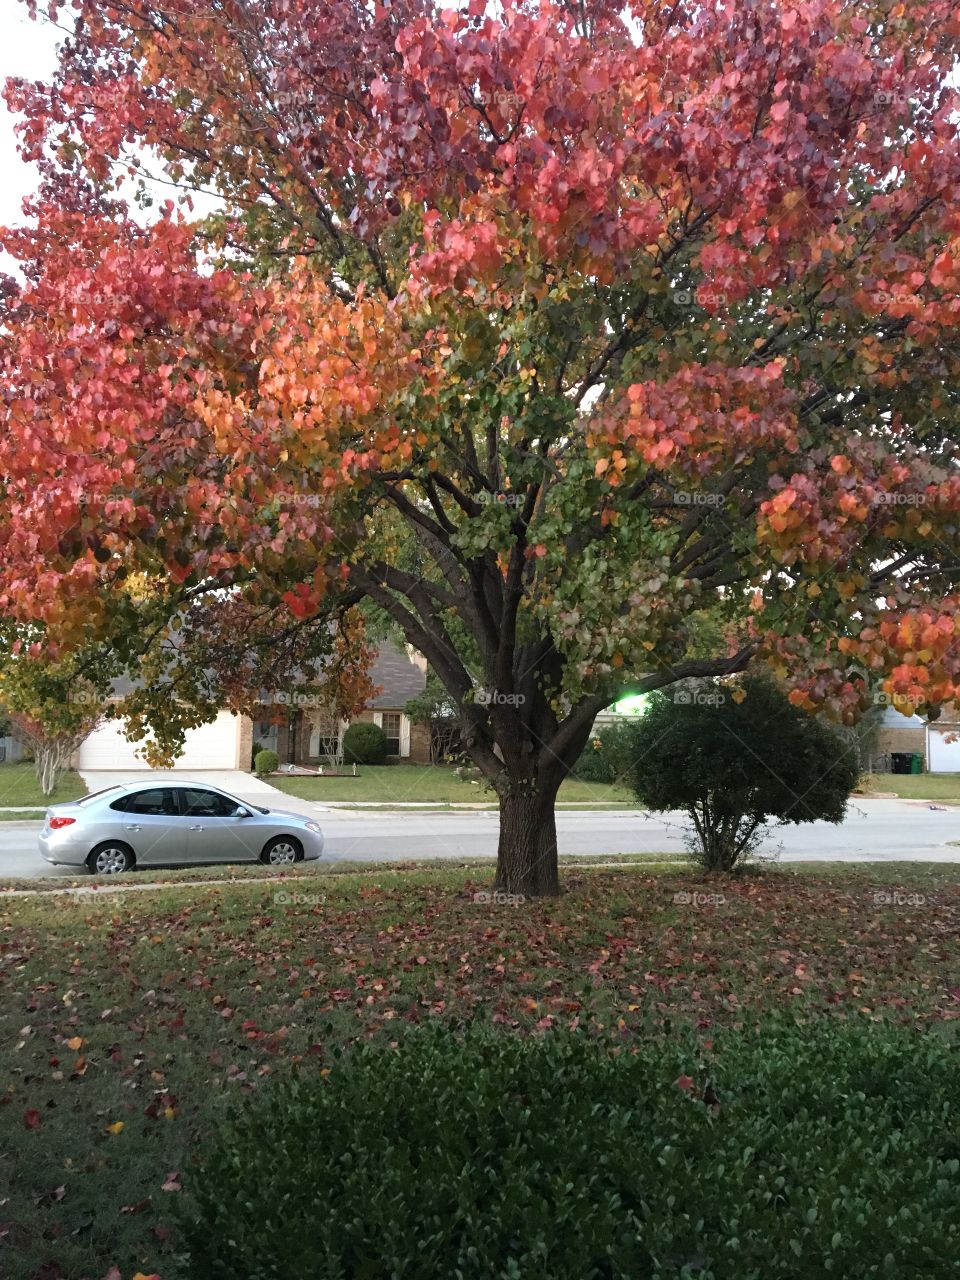 The leaves are [FALL]ing and changing colors 